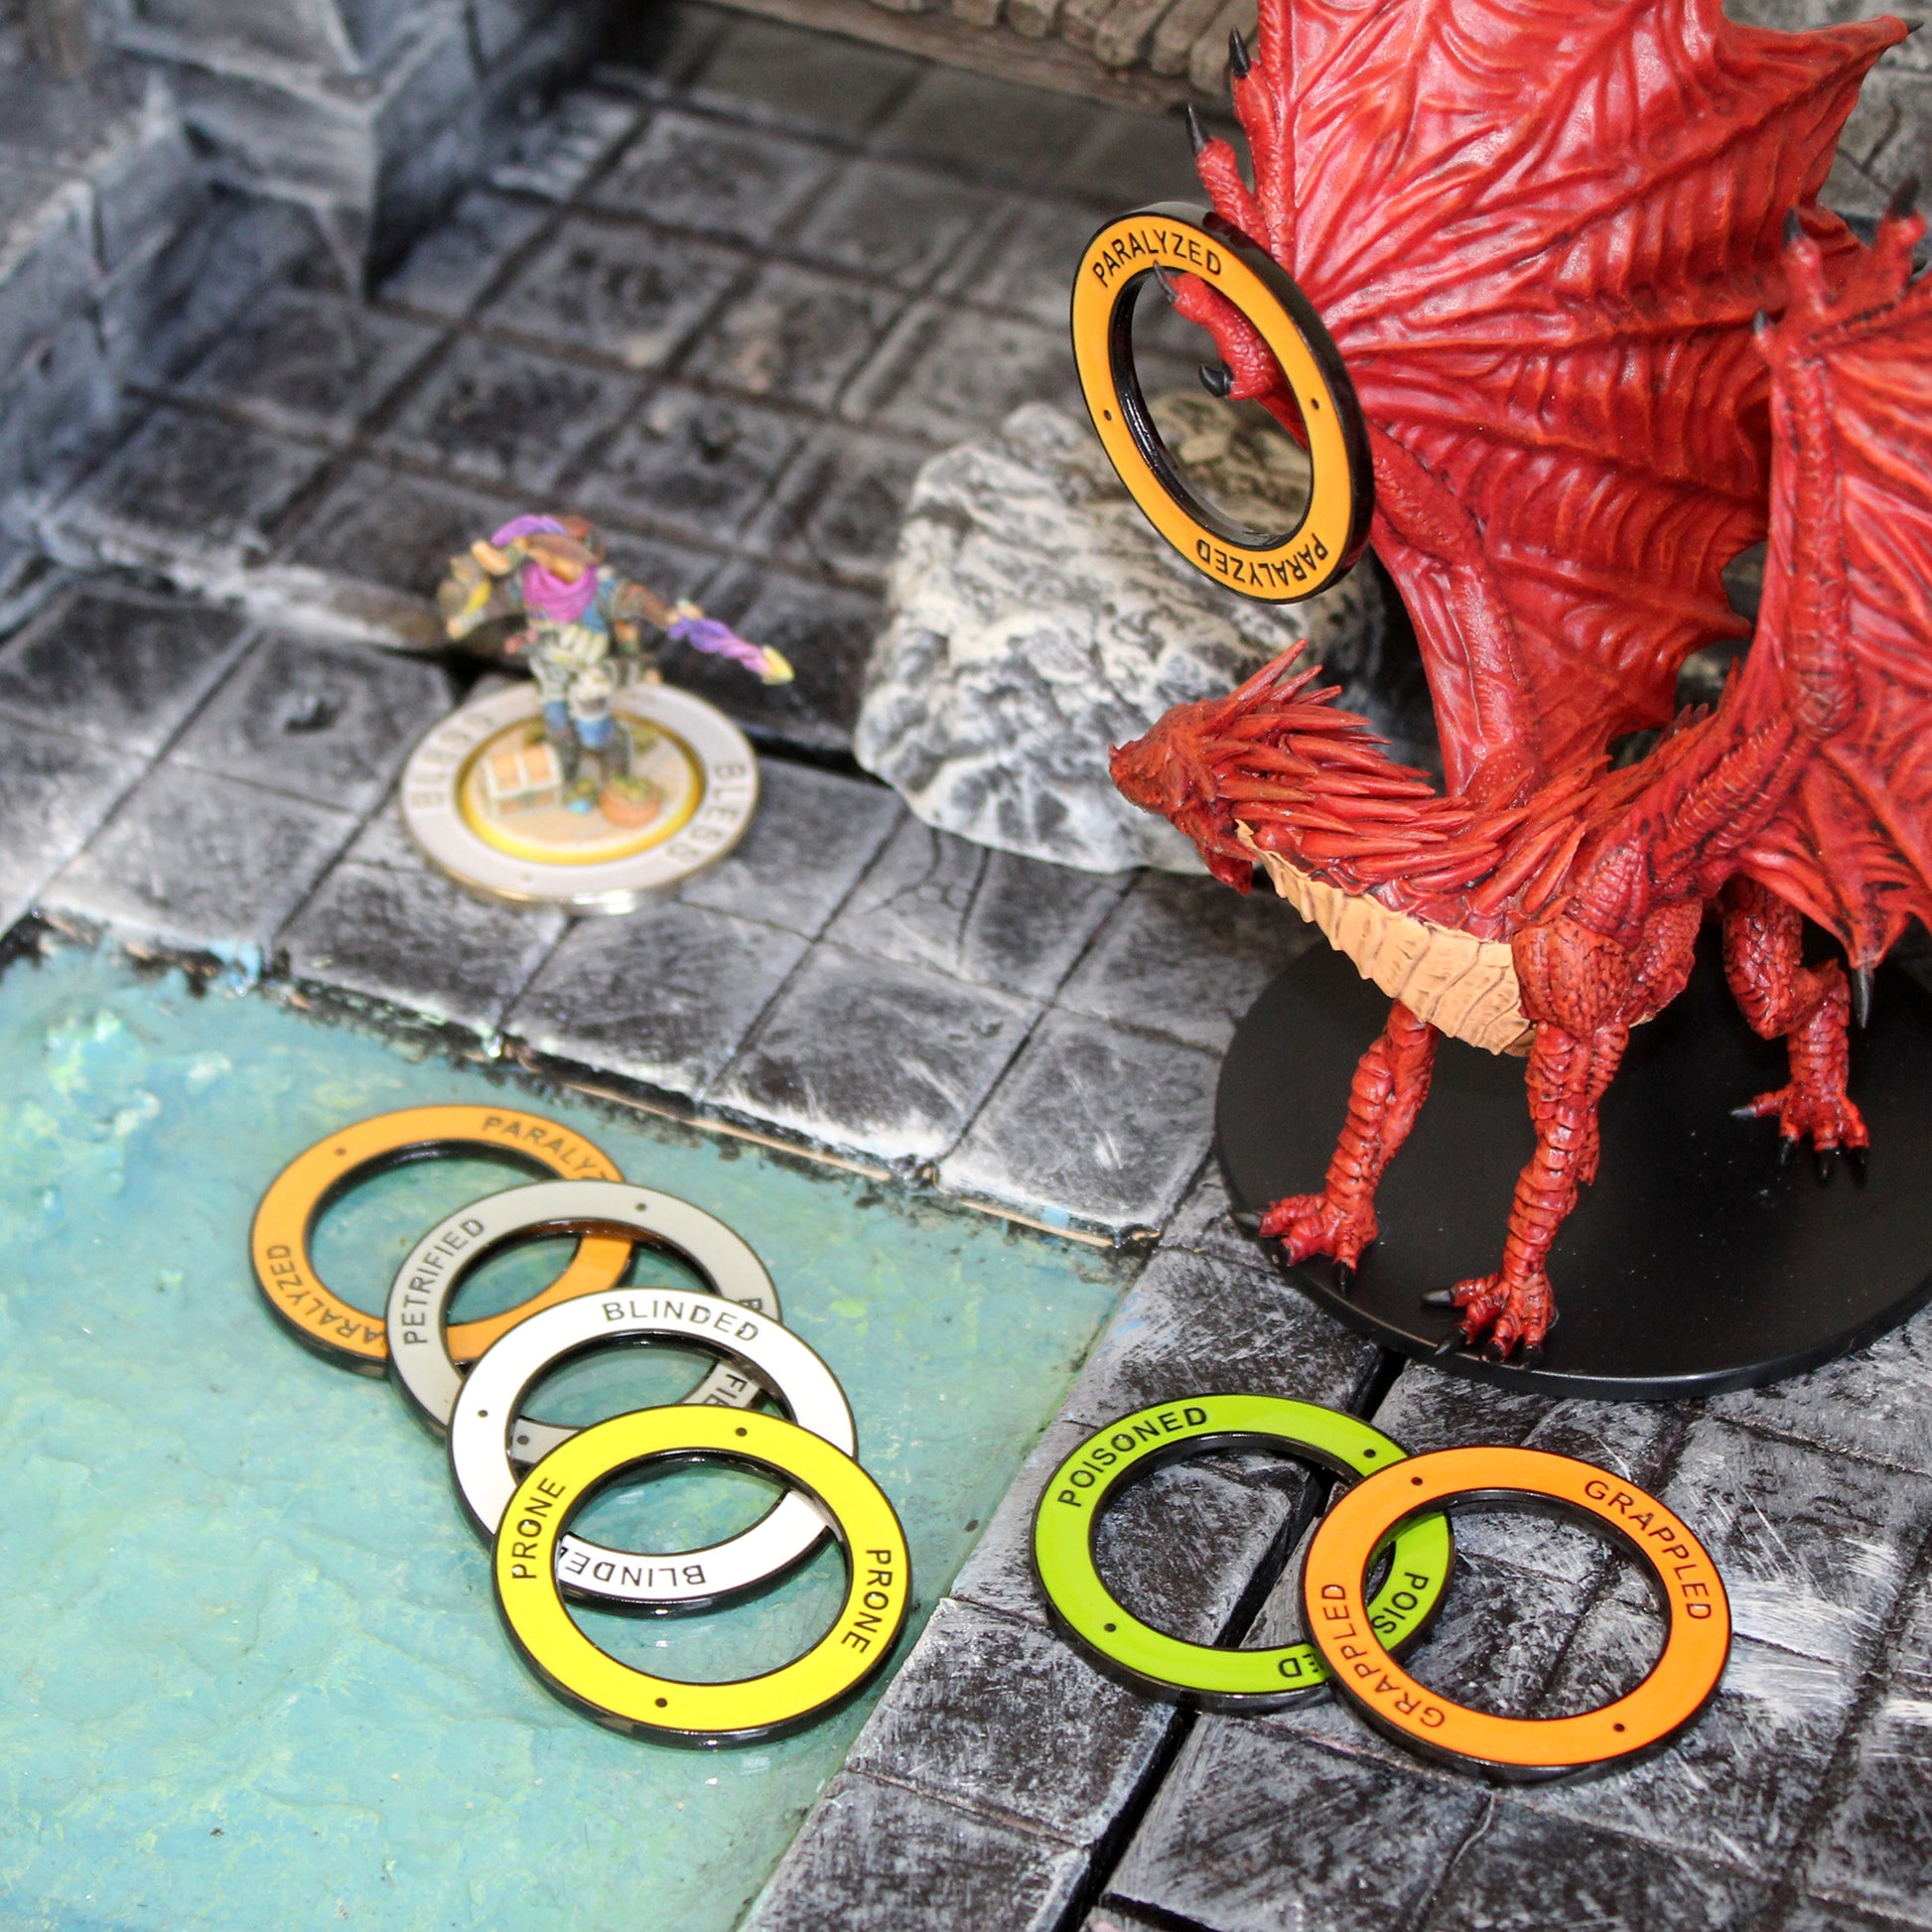 paralyzed d&d condition ring on a red dragon